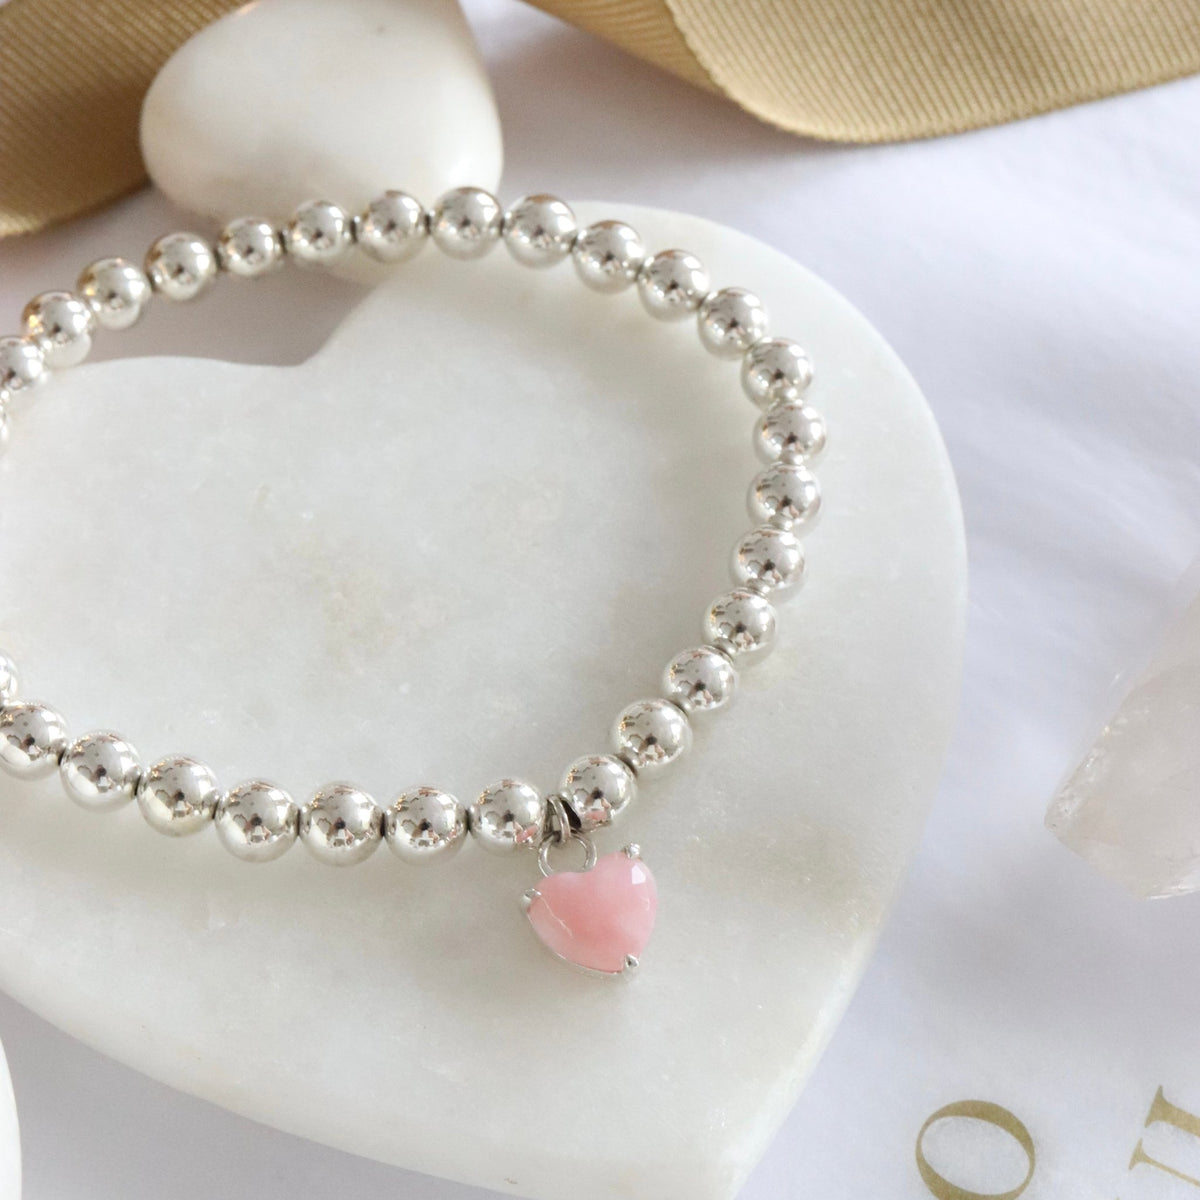 FRAICHE INSPIRE SWEETHEART STRETCH BRACELET – PINK OPAL &amp; SILVER 7&quot; - SO PRETTY CARA COTTER